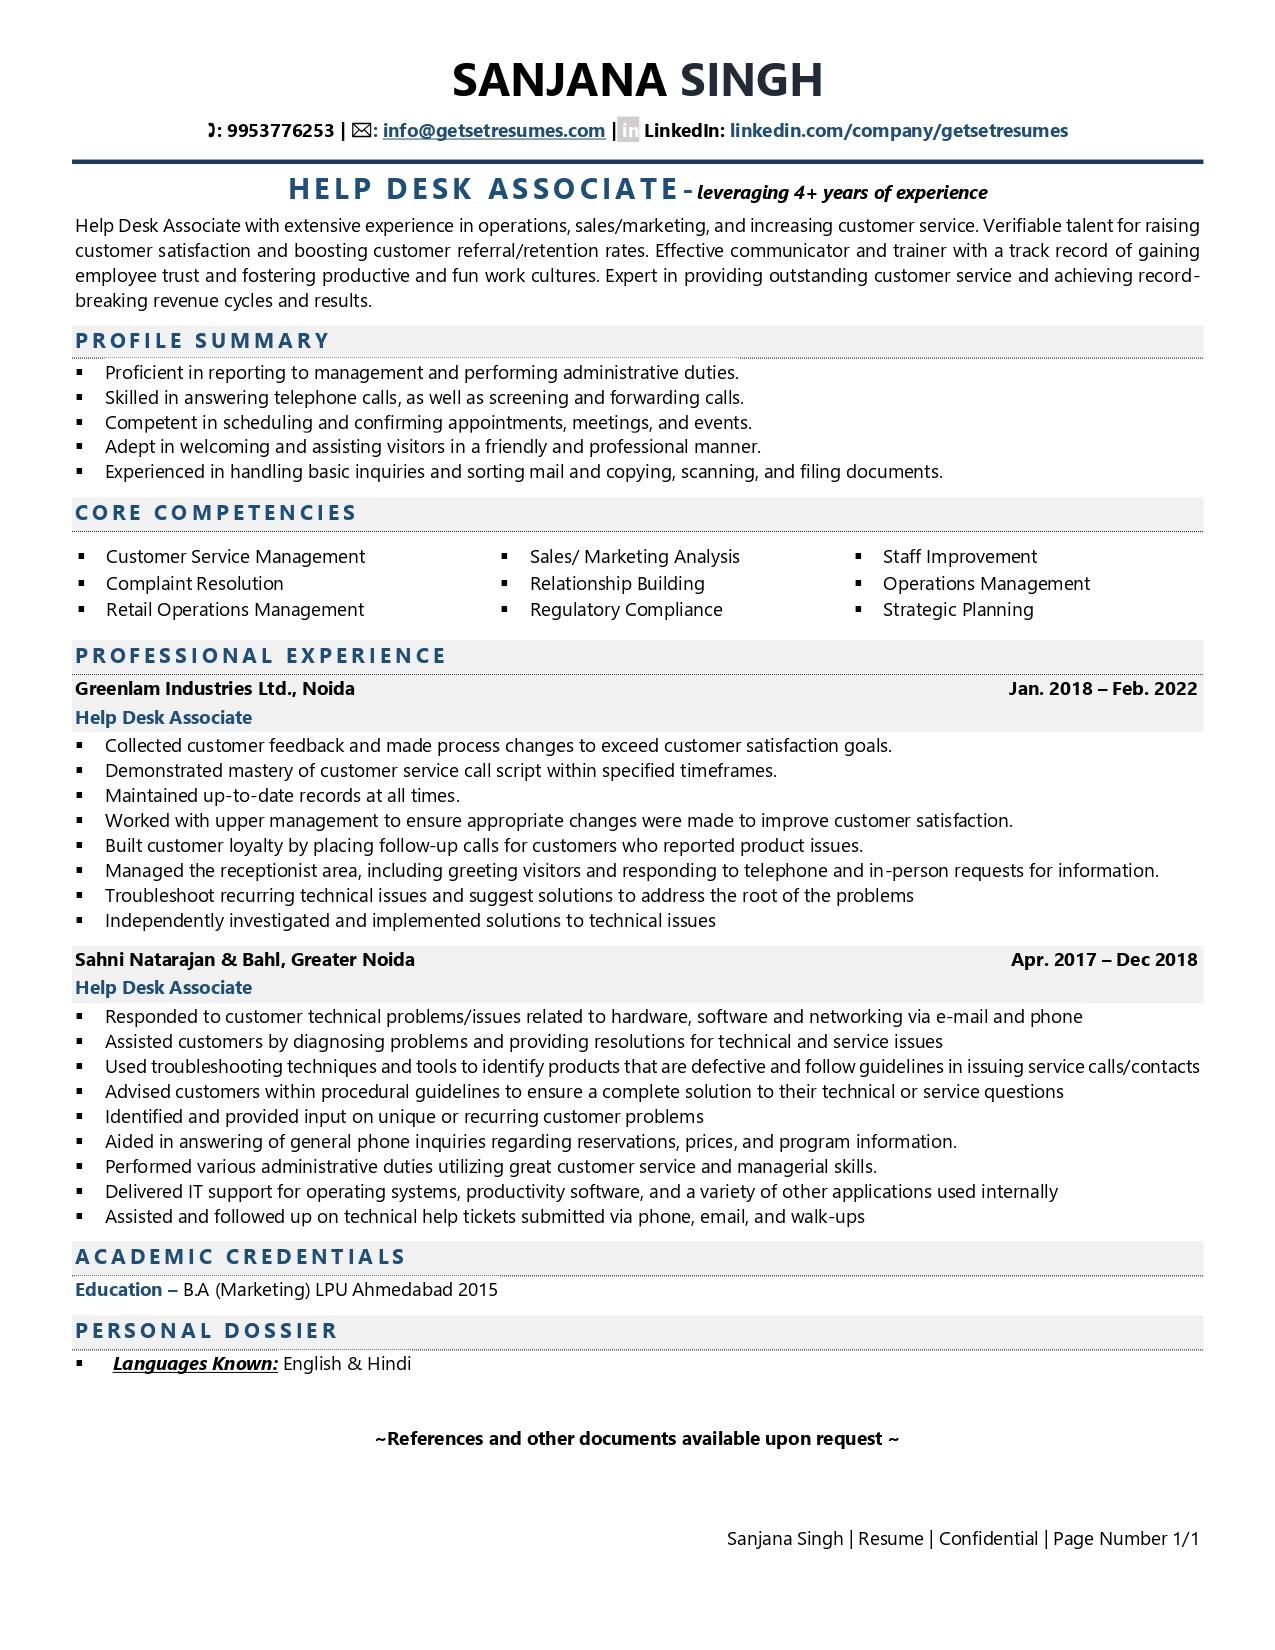 entry level help desk resume with soft and technical skills